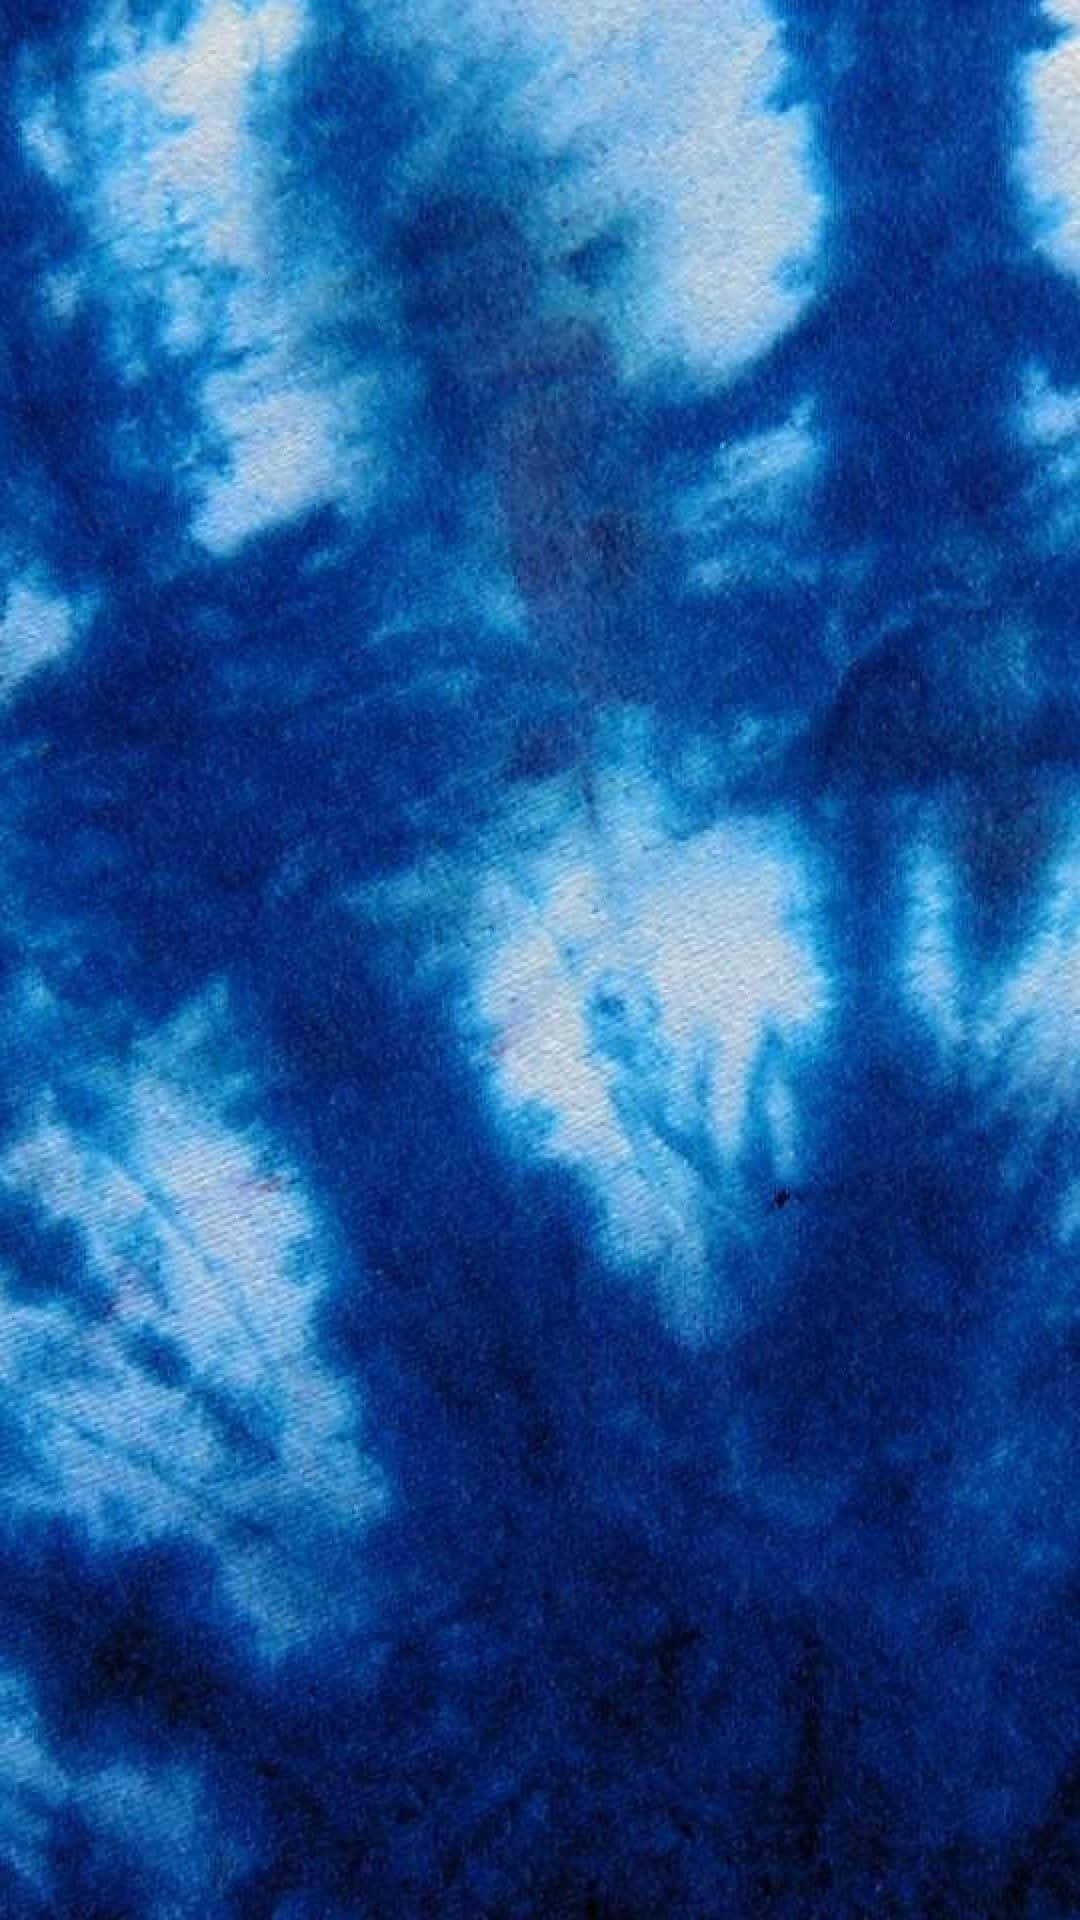 Become one with the waves of blue with Blue Tie-Dye!